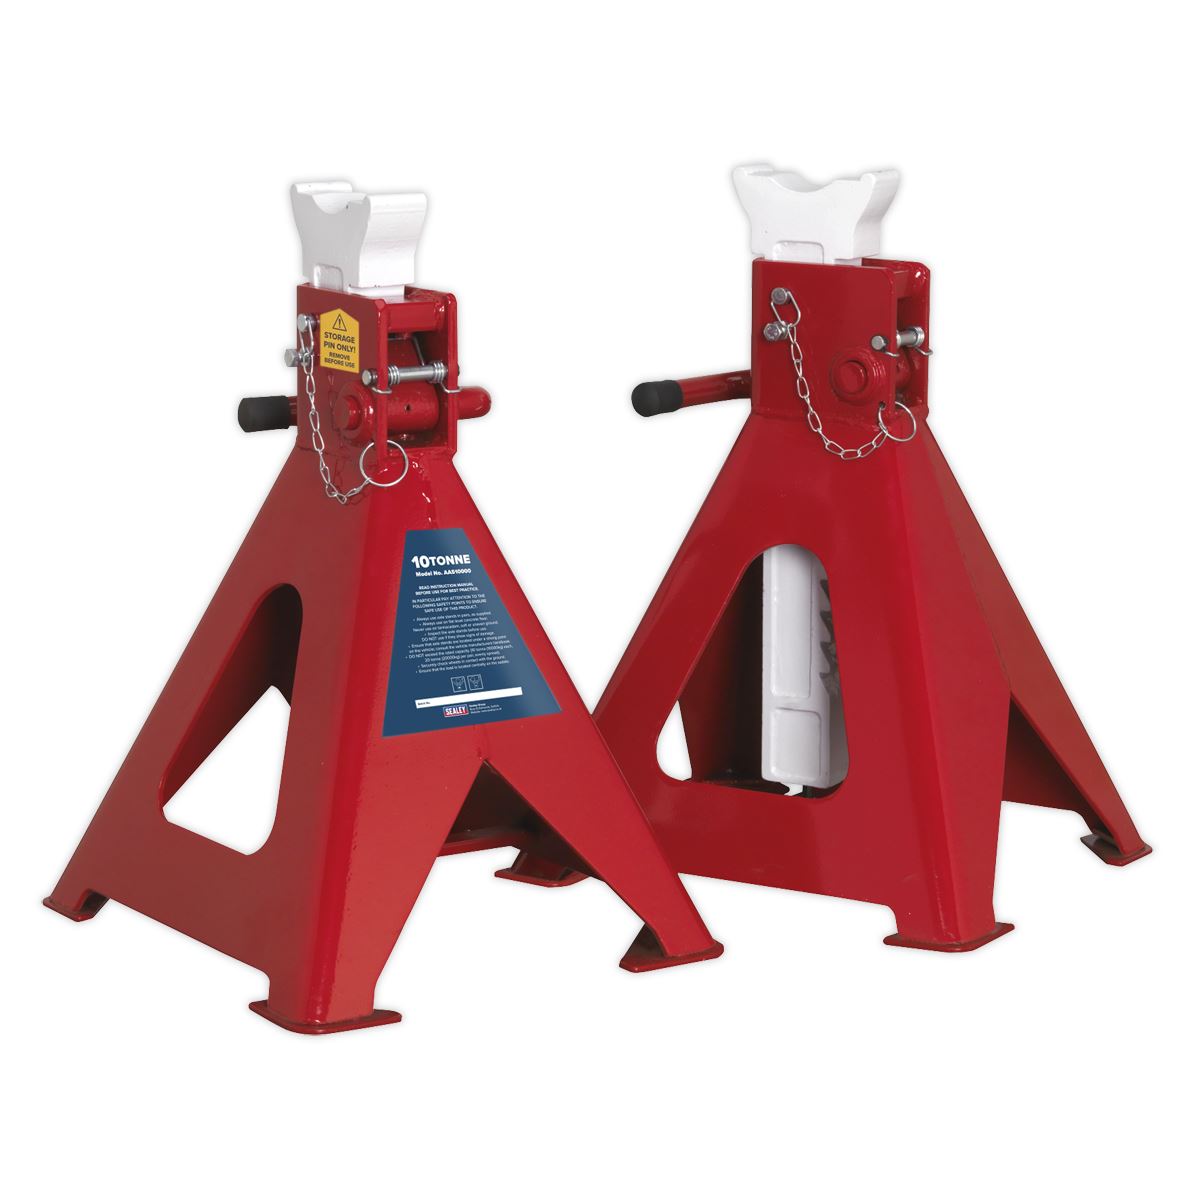 Sealey Auto Rise Ratchet Axle Stands (Pair) 10 Tonne Capacity per Stand